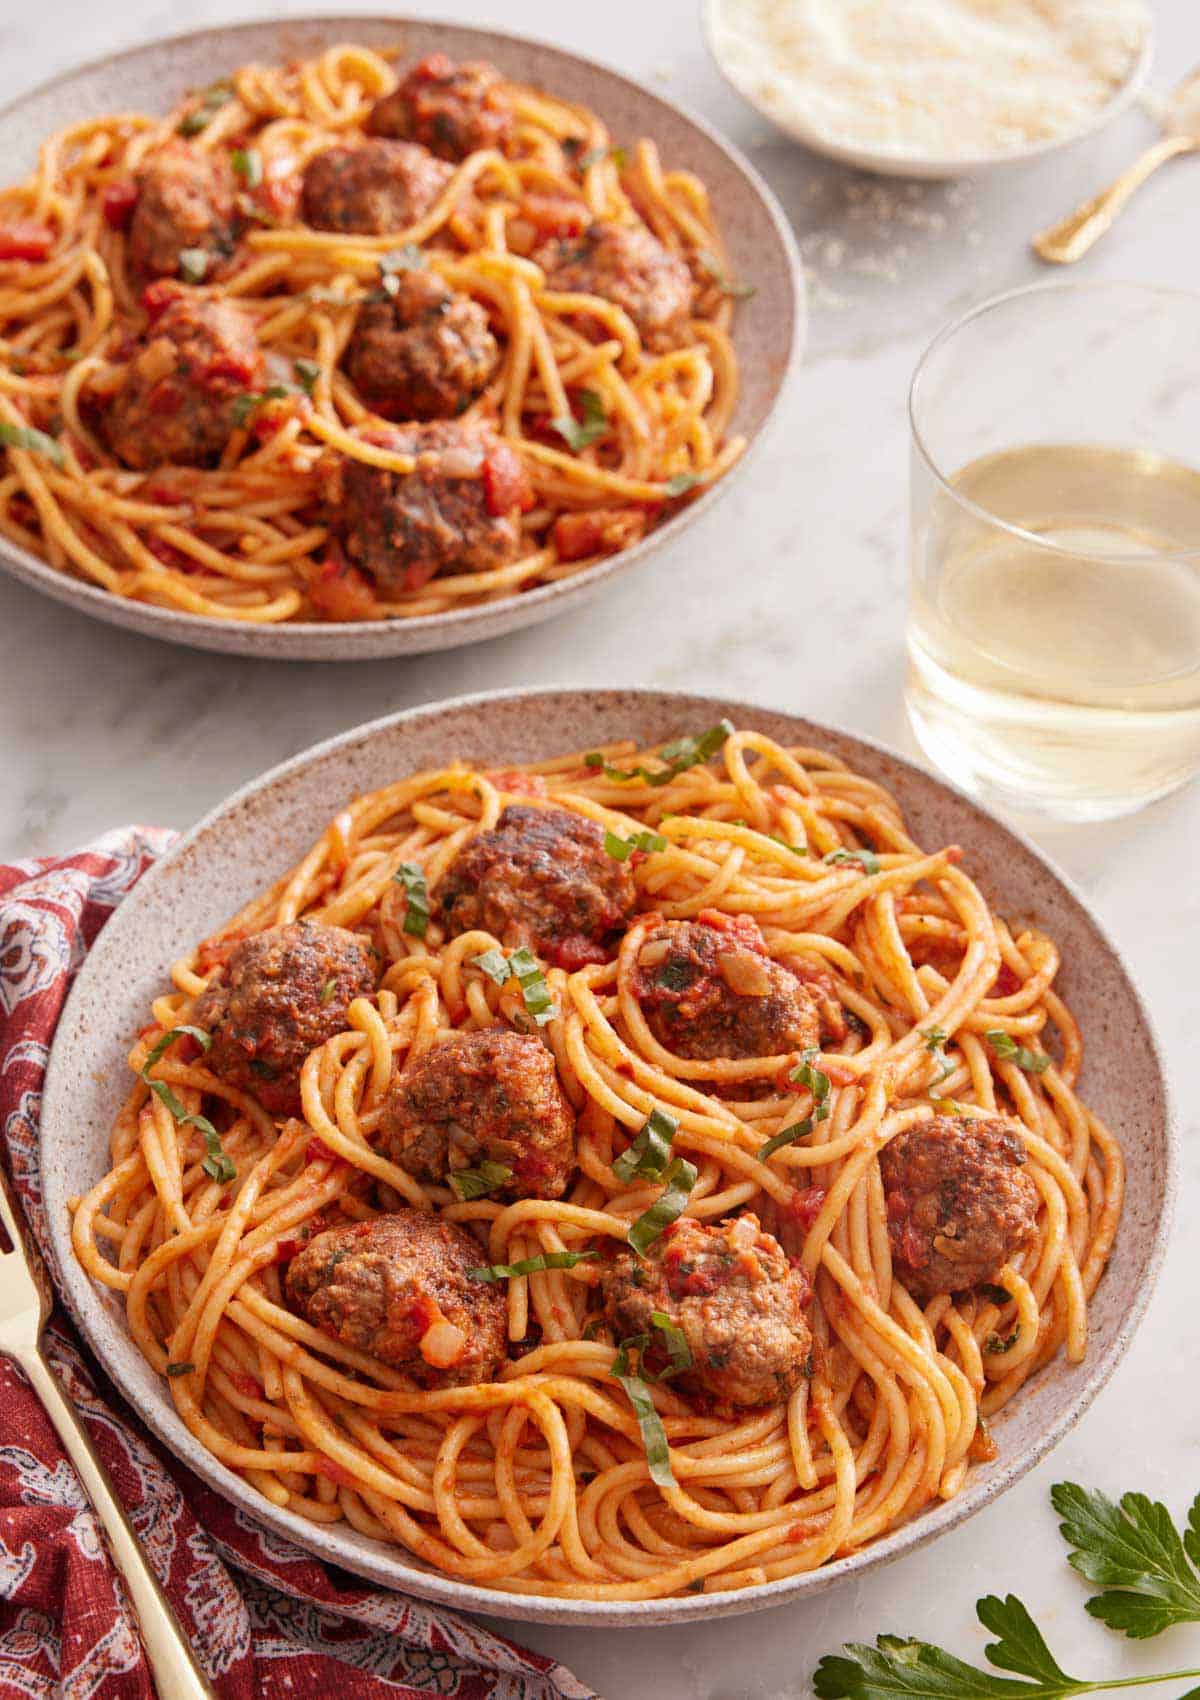 Two plates of spaghetti and meatballs with a glass of wine inbetween.